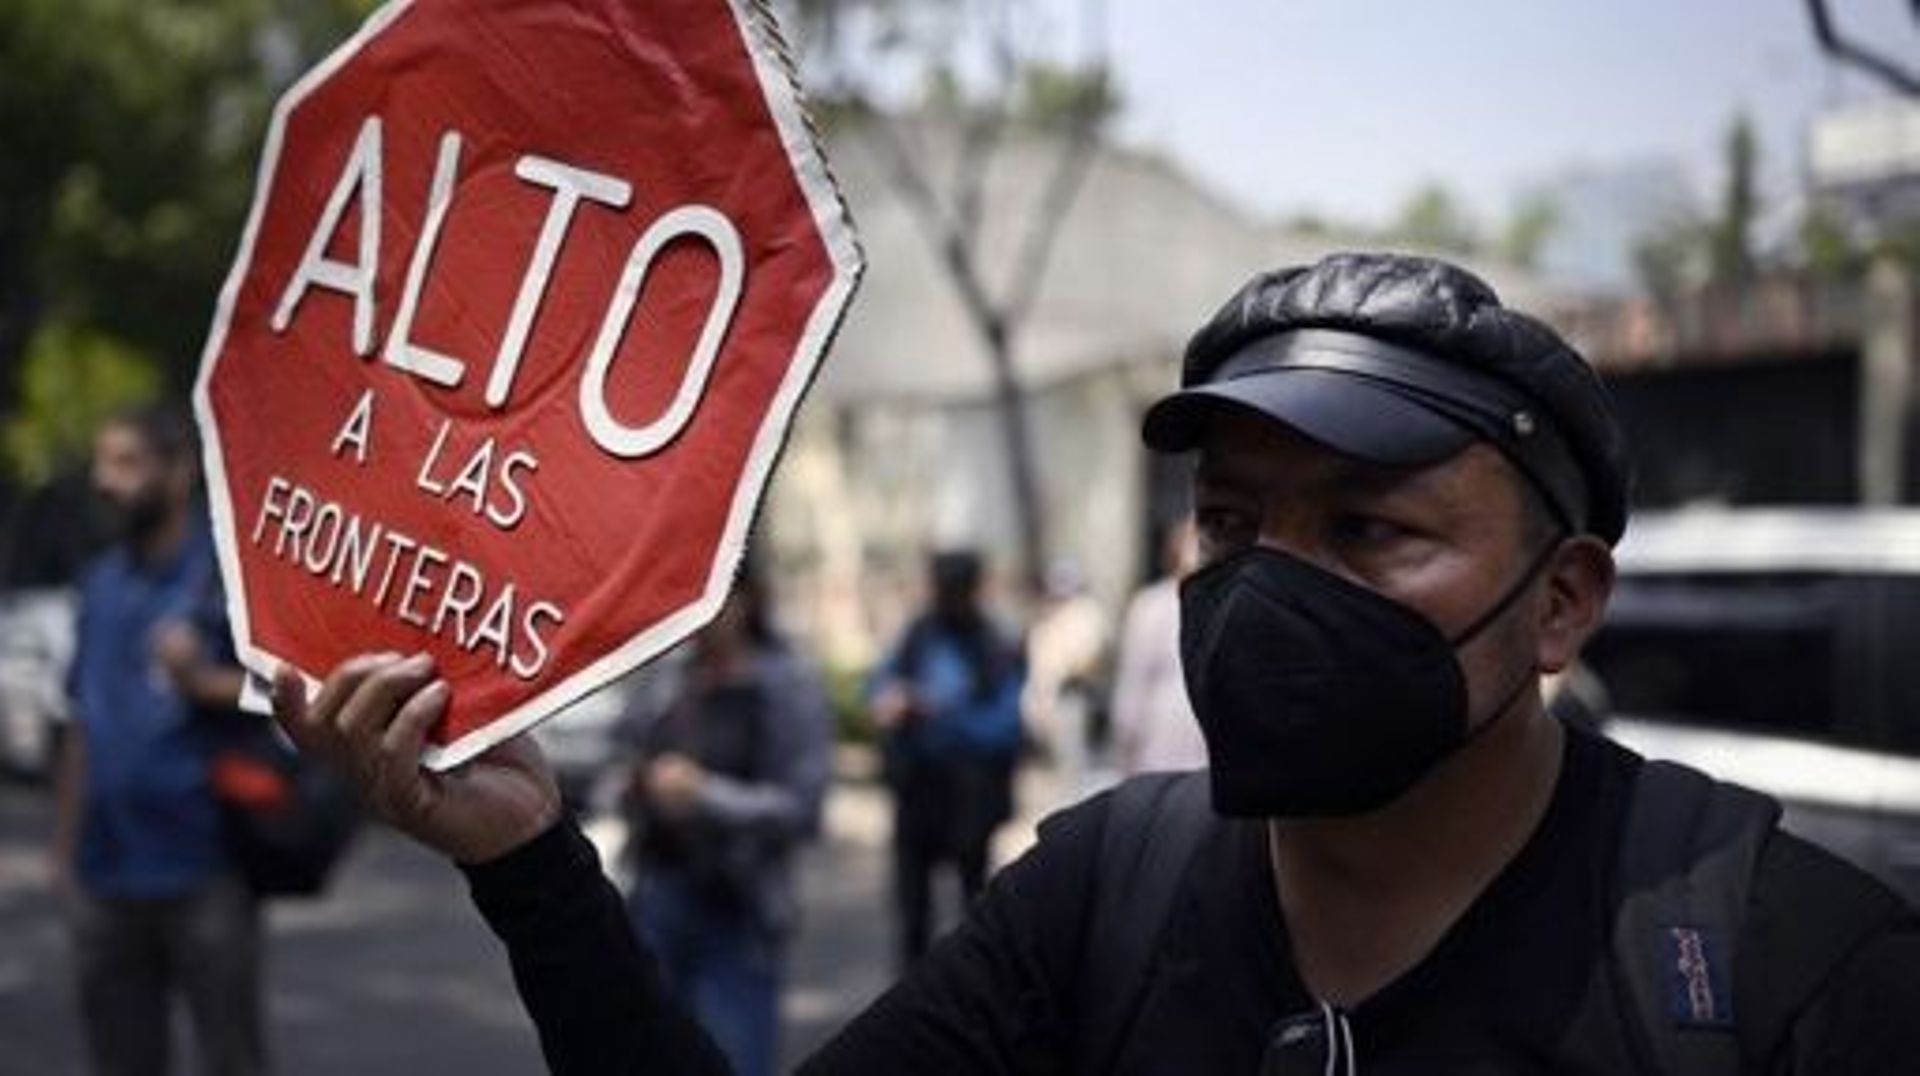 An activist with a sign reading "Stop the borders" protests in support of migrants outside the Mexican Interior Ministry in Mexico City on March 29, 2023. Mexico's president vowed Wednesday there would be "no impunity" for those found responsible for the 